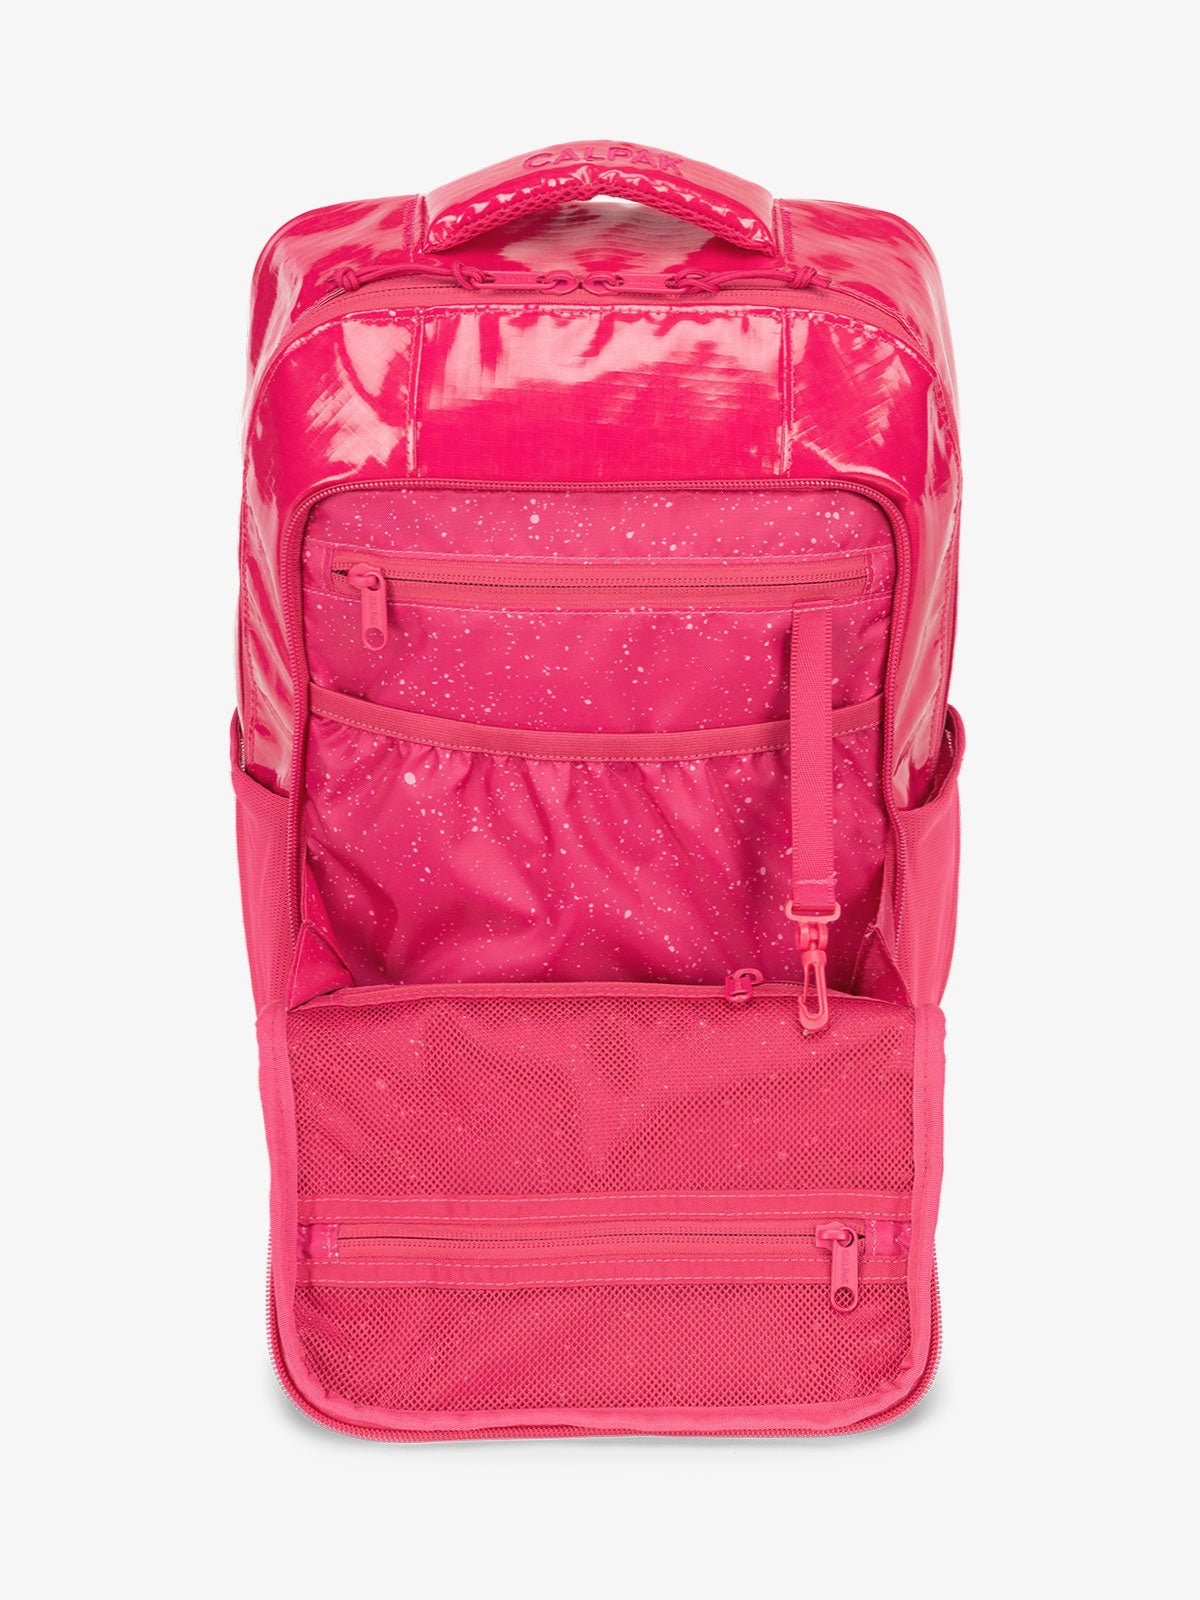 Front organizational panel of CALPAK Terra Hydration Backpack in pink